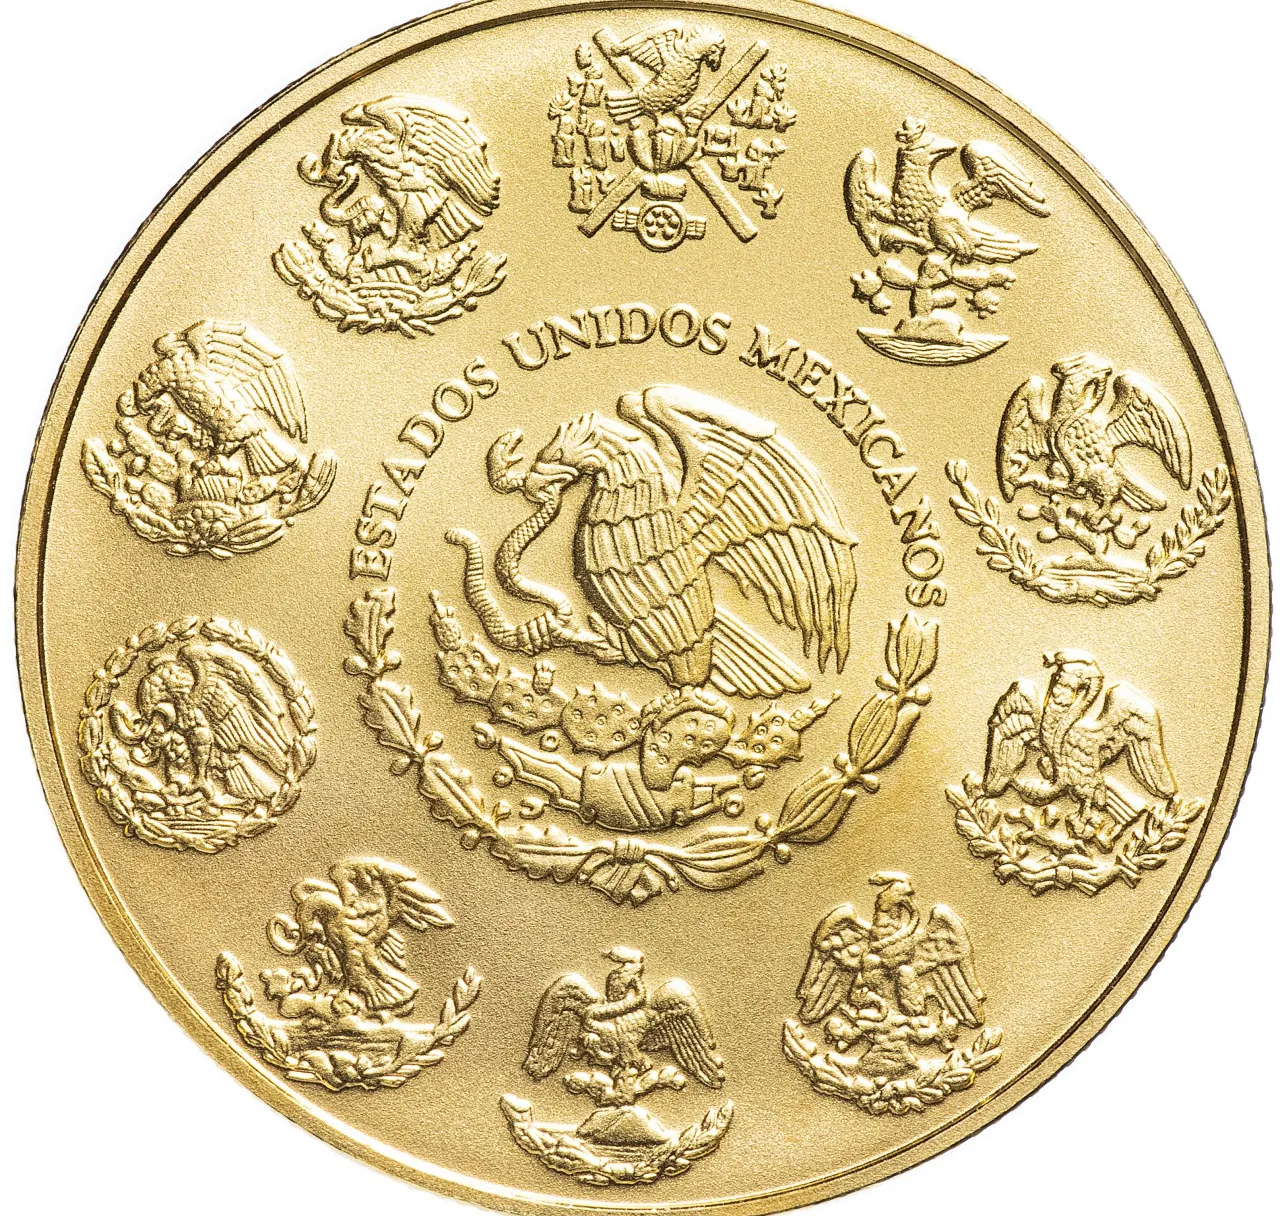 a gold coin with the emblem of the united states